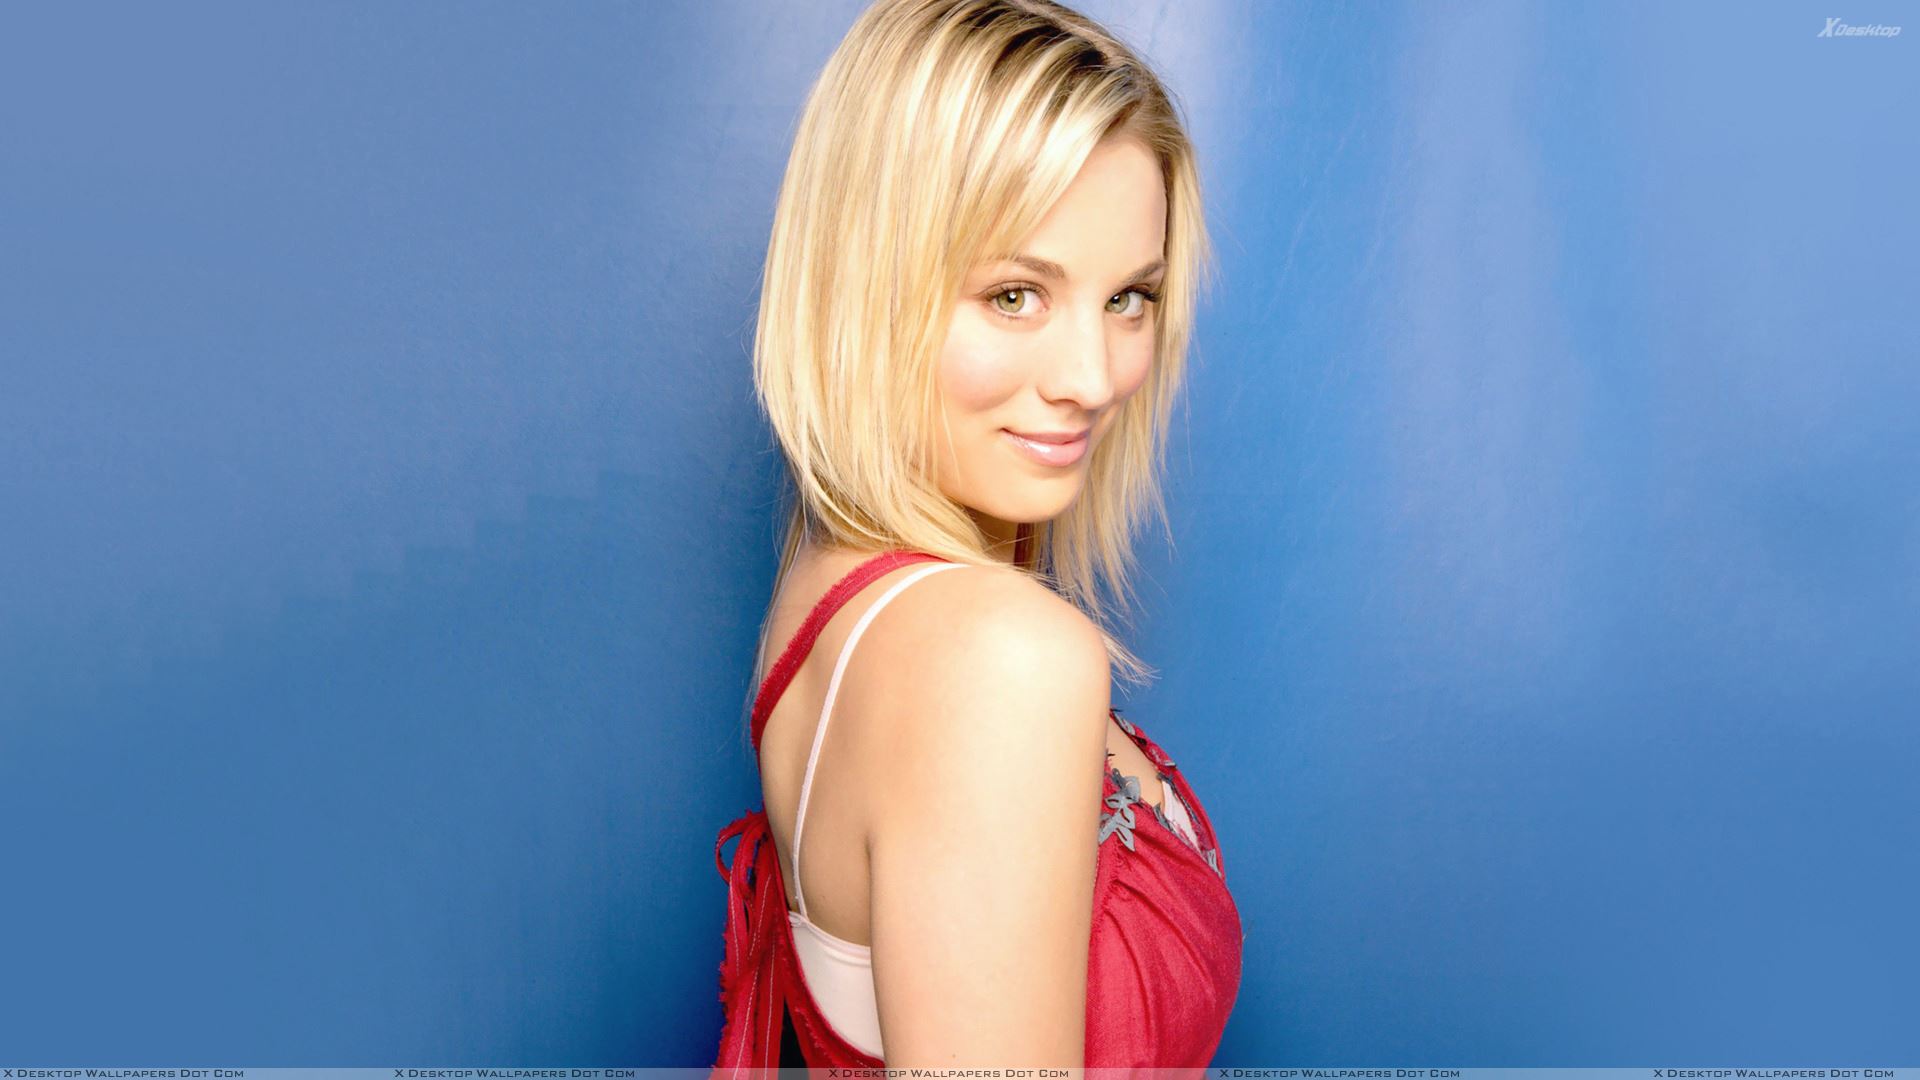 View Wallpaper Details - Kaley Cuoco , HD Wallpaper & Backgrounds